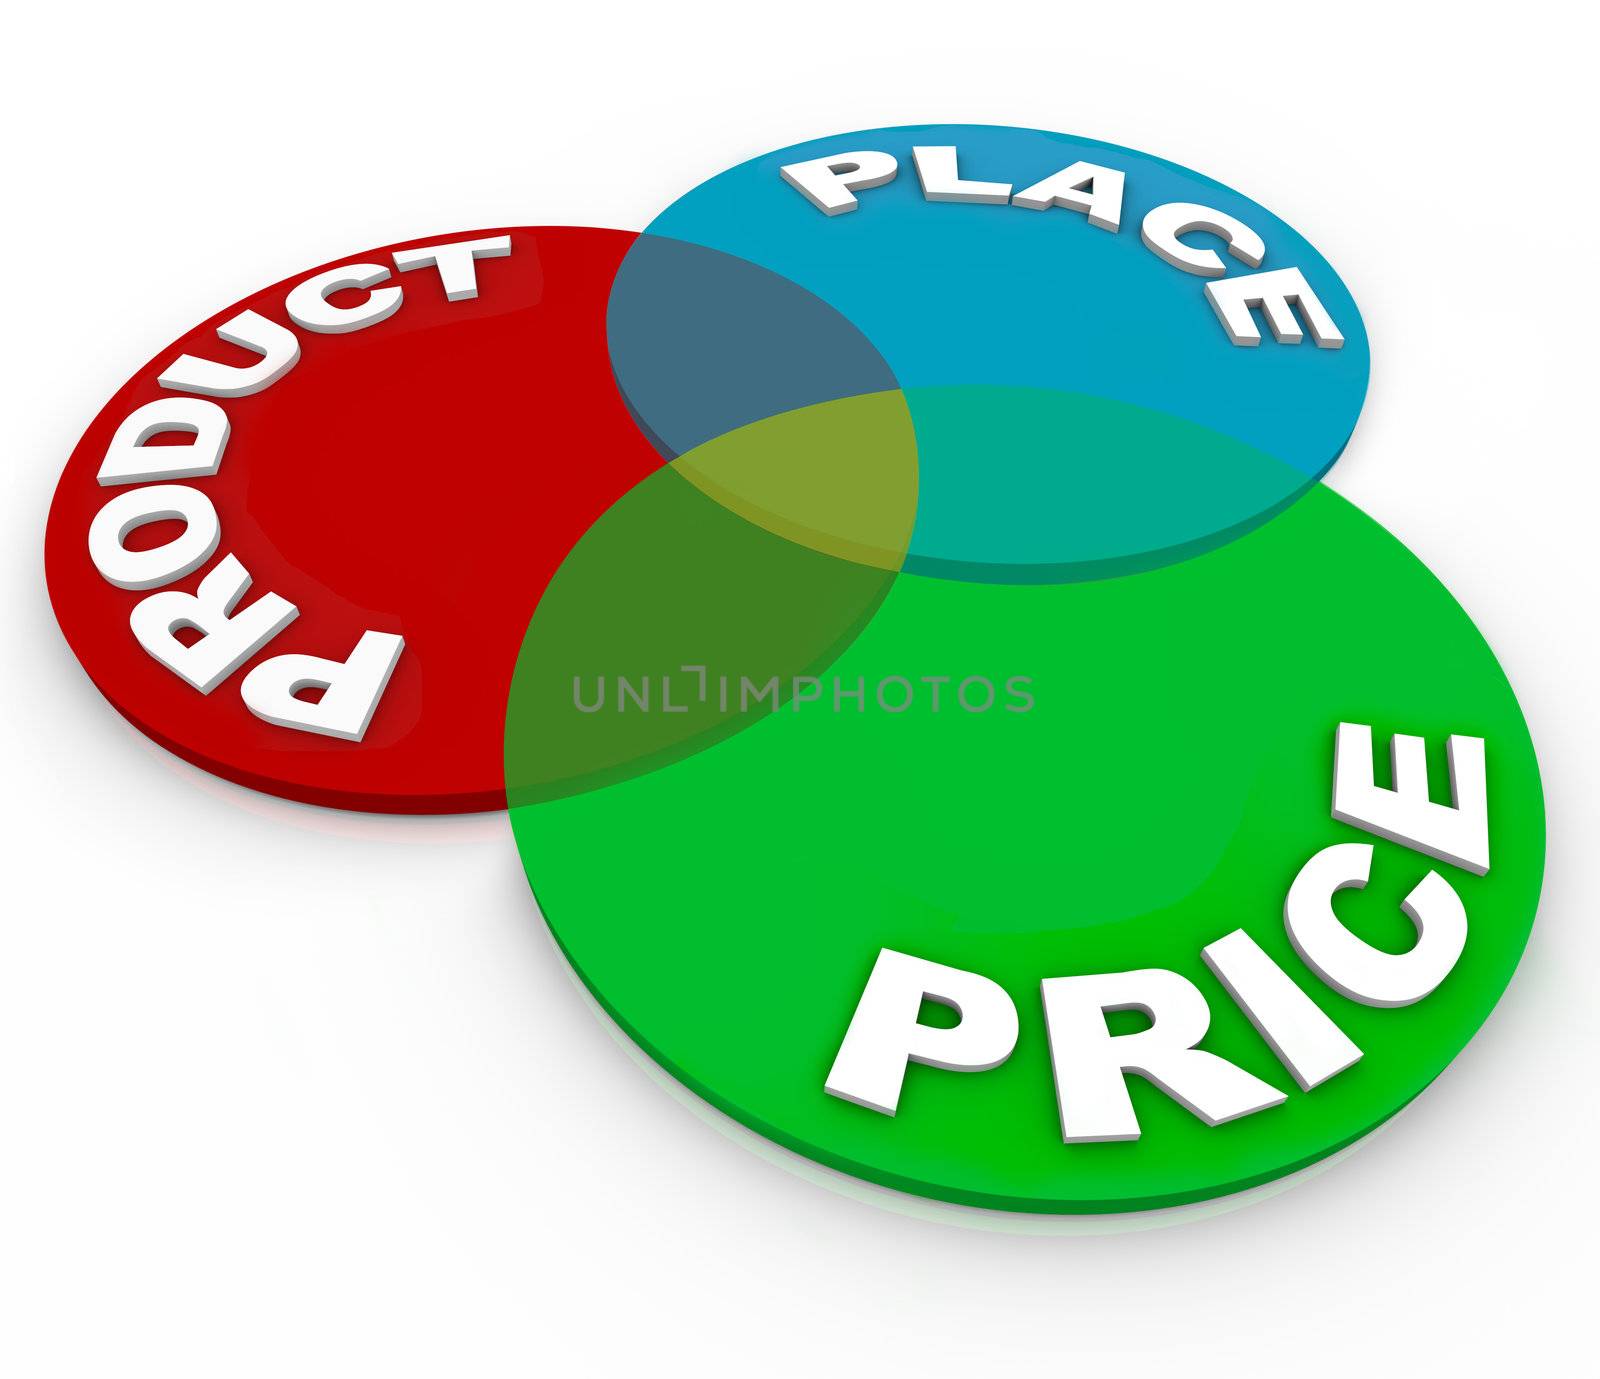 Three principles of marketing -- product, price and place -- on circles in a venn diagram to demonstrate the essential elements of a business strategy or plan for success